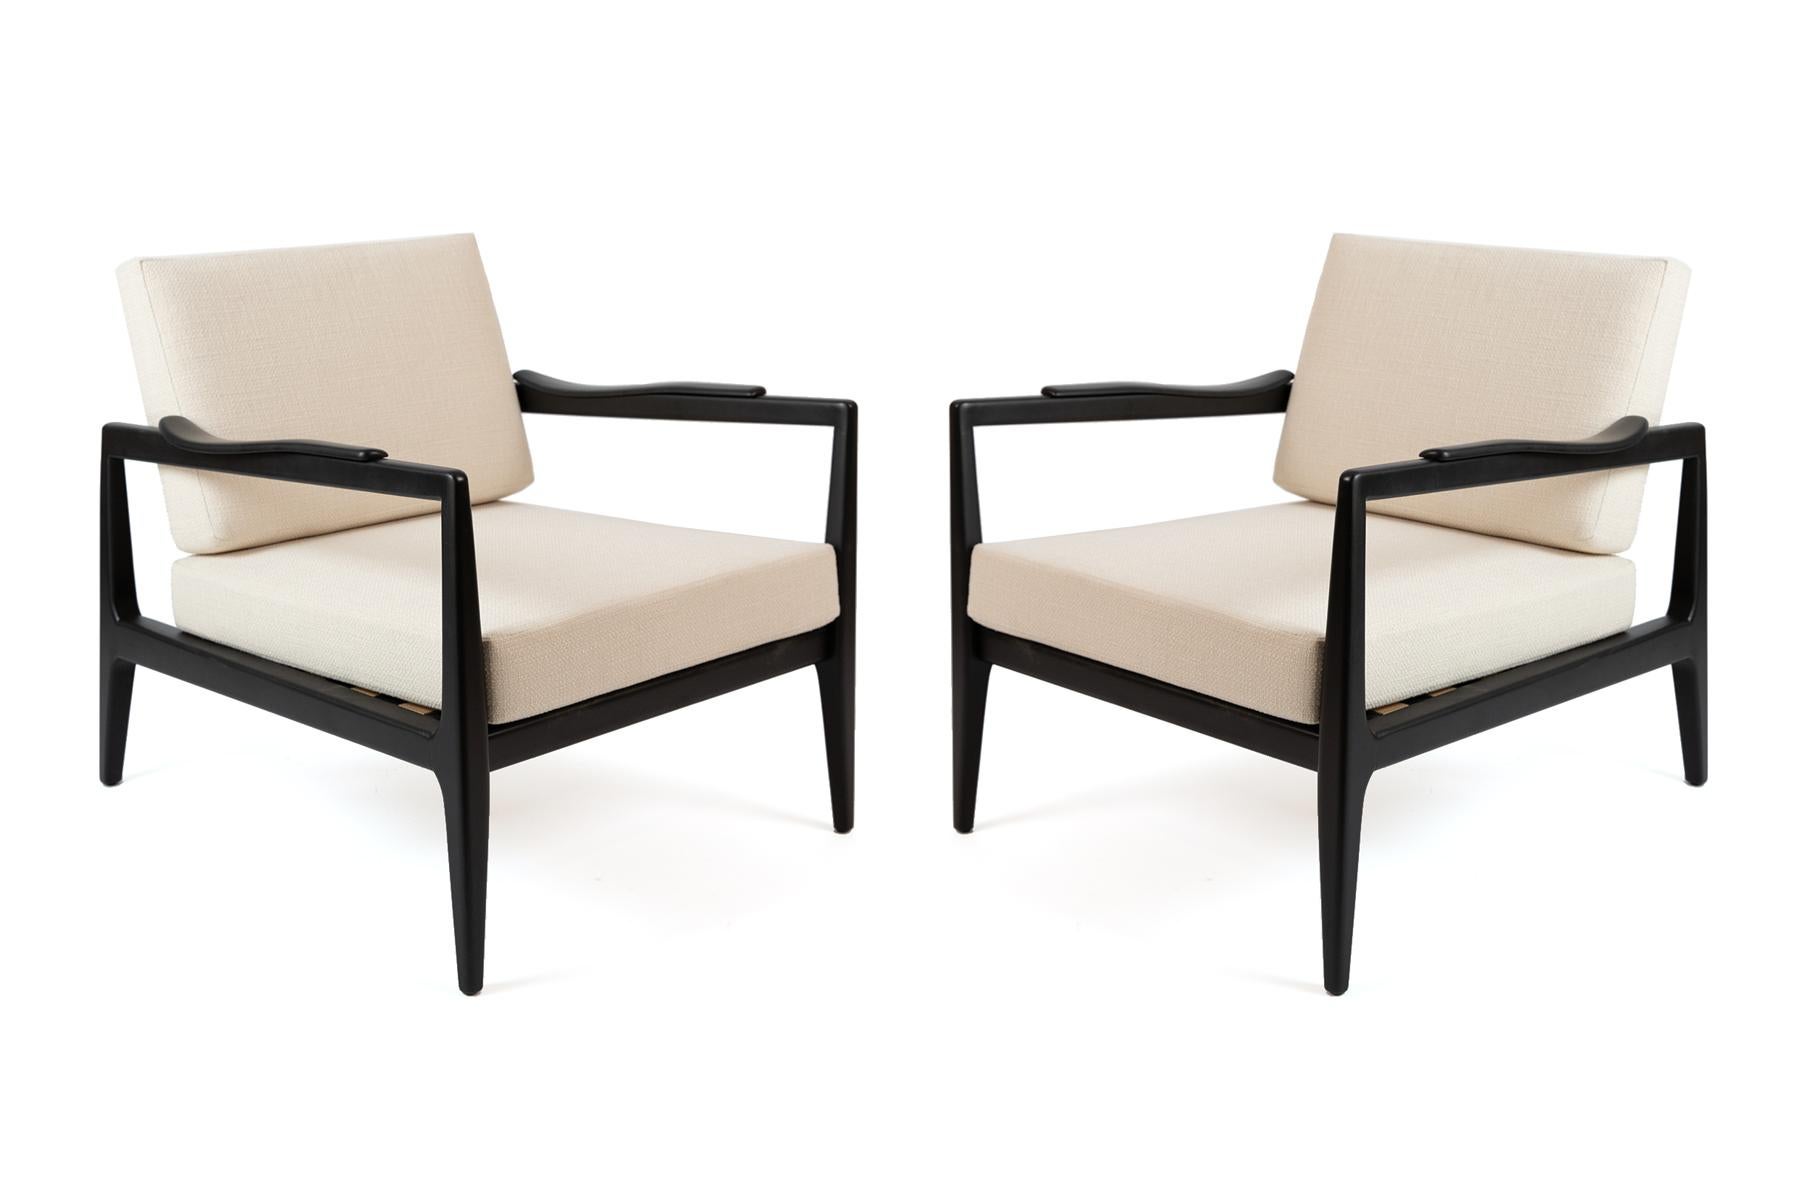 Mid-20th Century Edmond Spence Pair of Ebonized and Upholstered Lounge Chairs